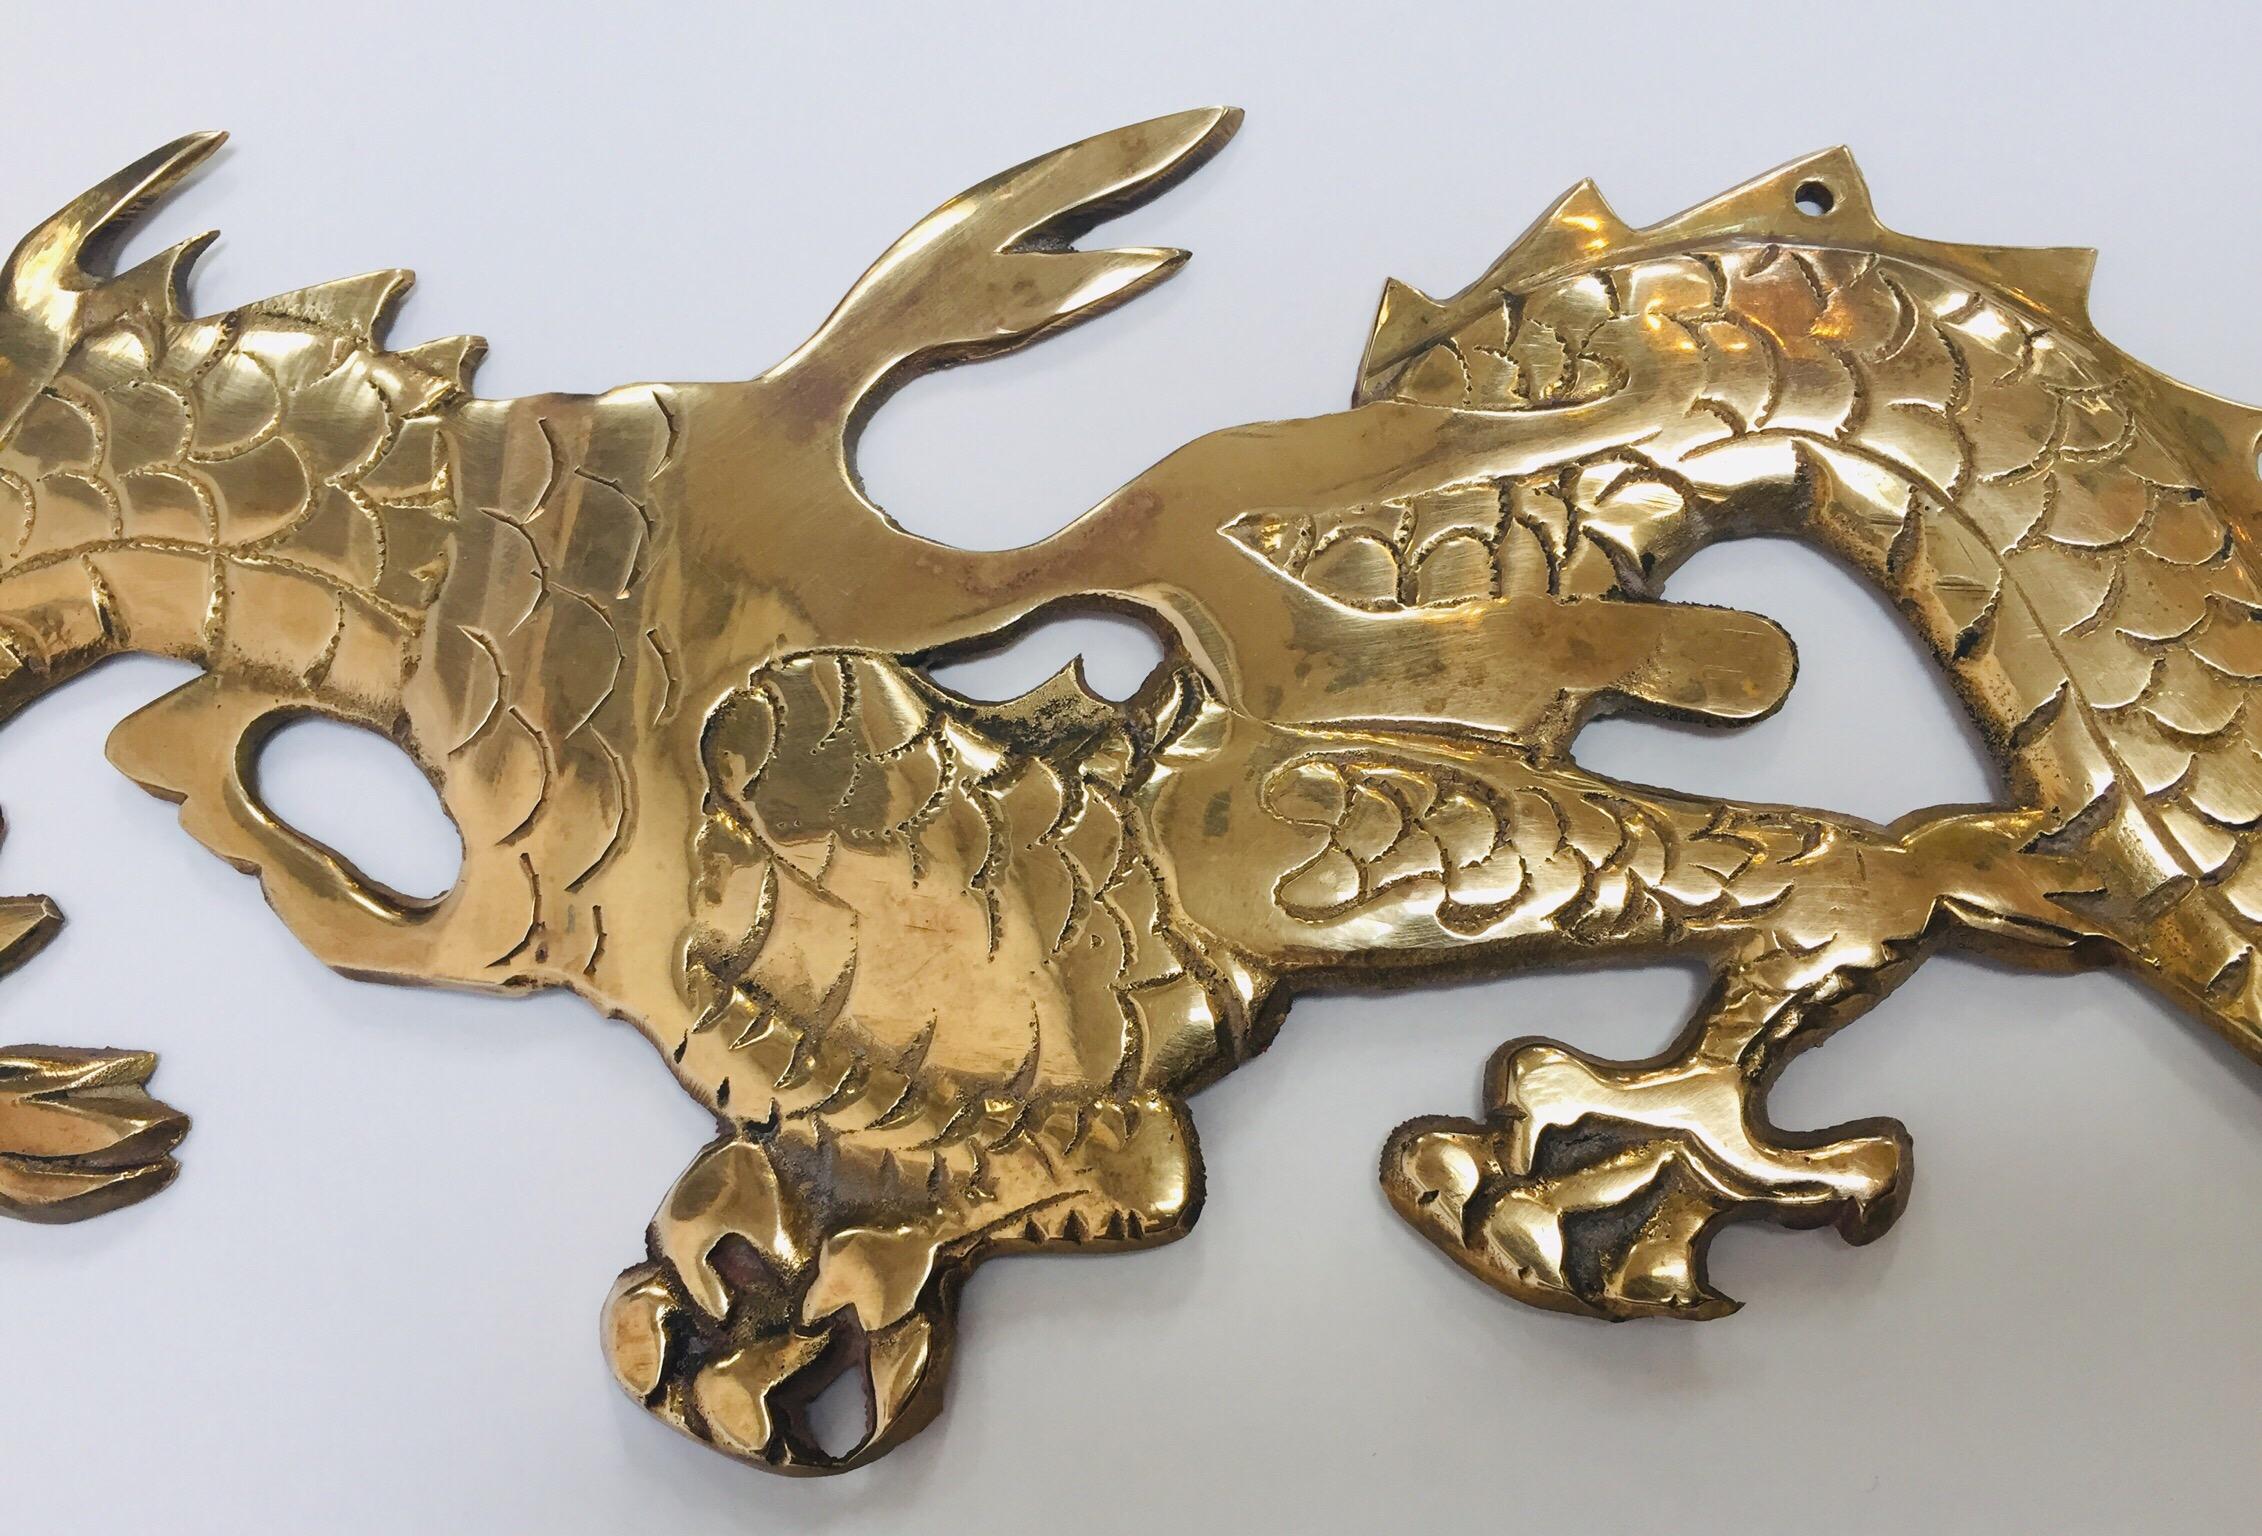 Hand-Carved Wall Mount, Asian Cast Brass Dragon Chasing a Ball